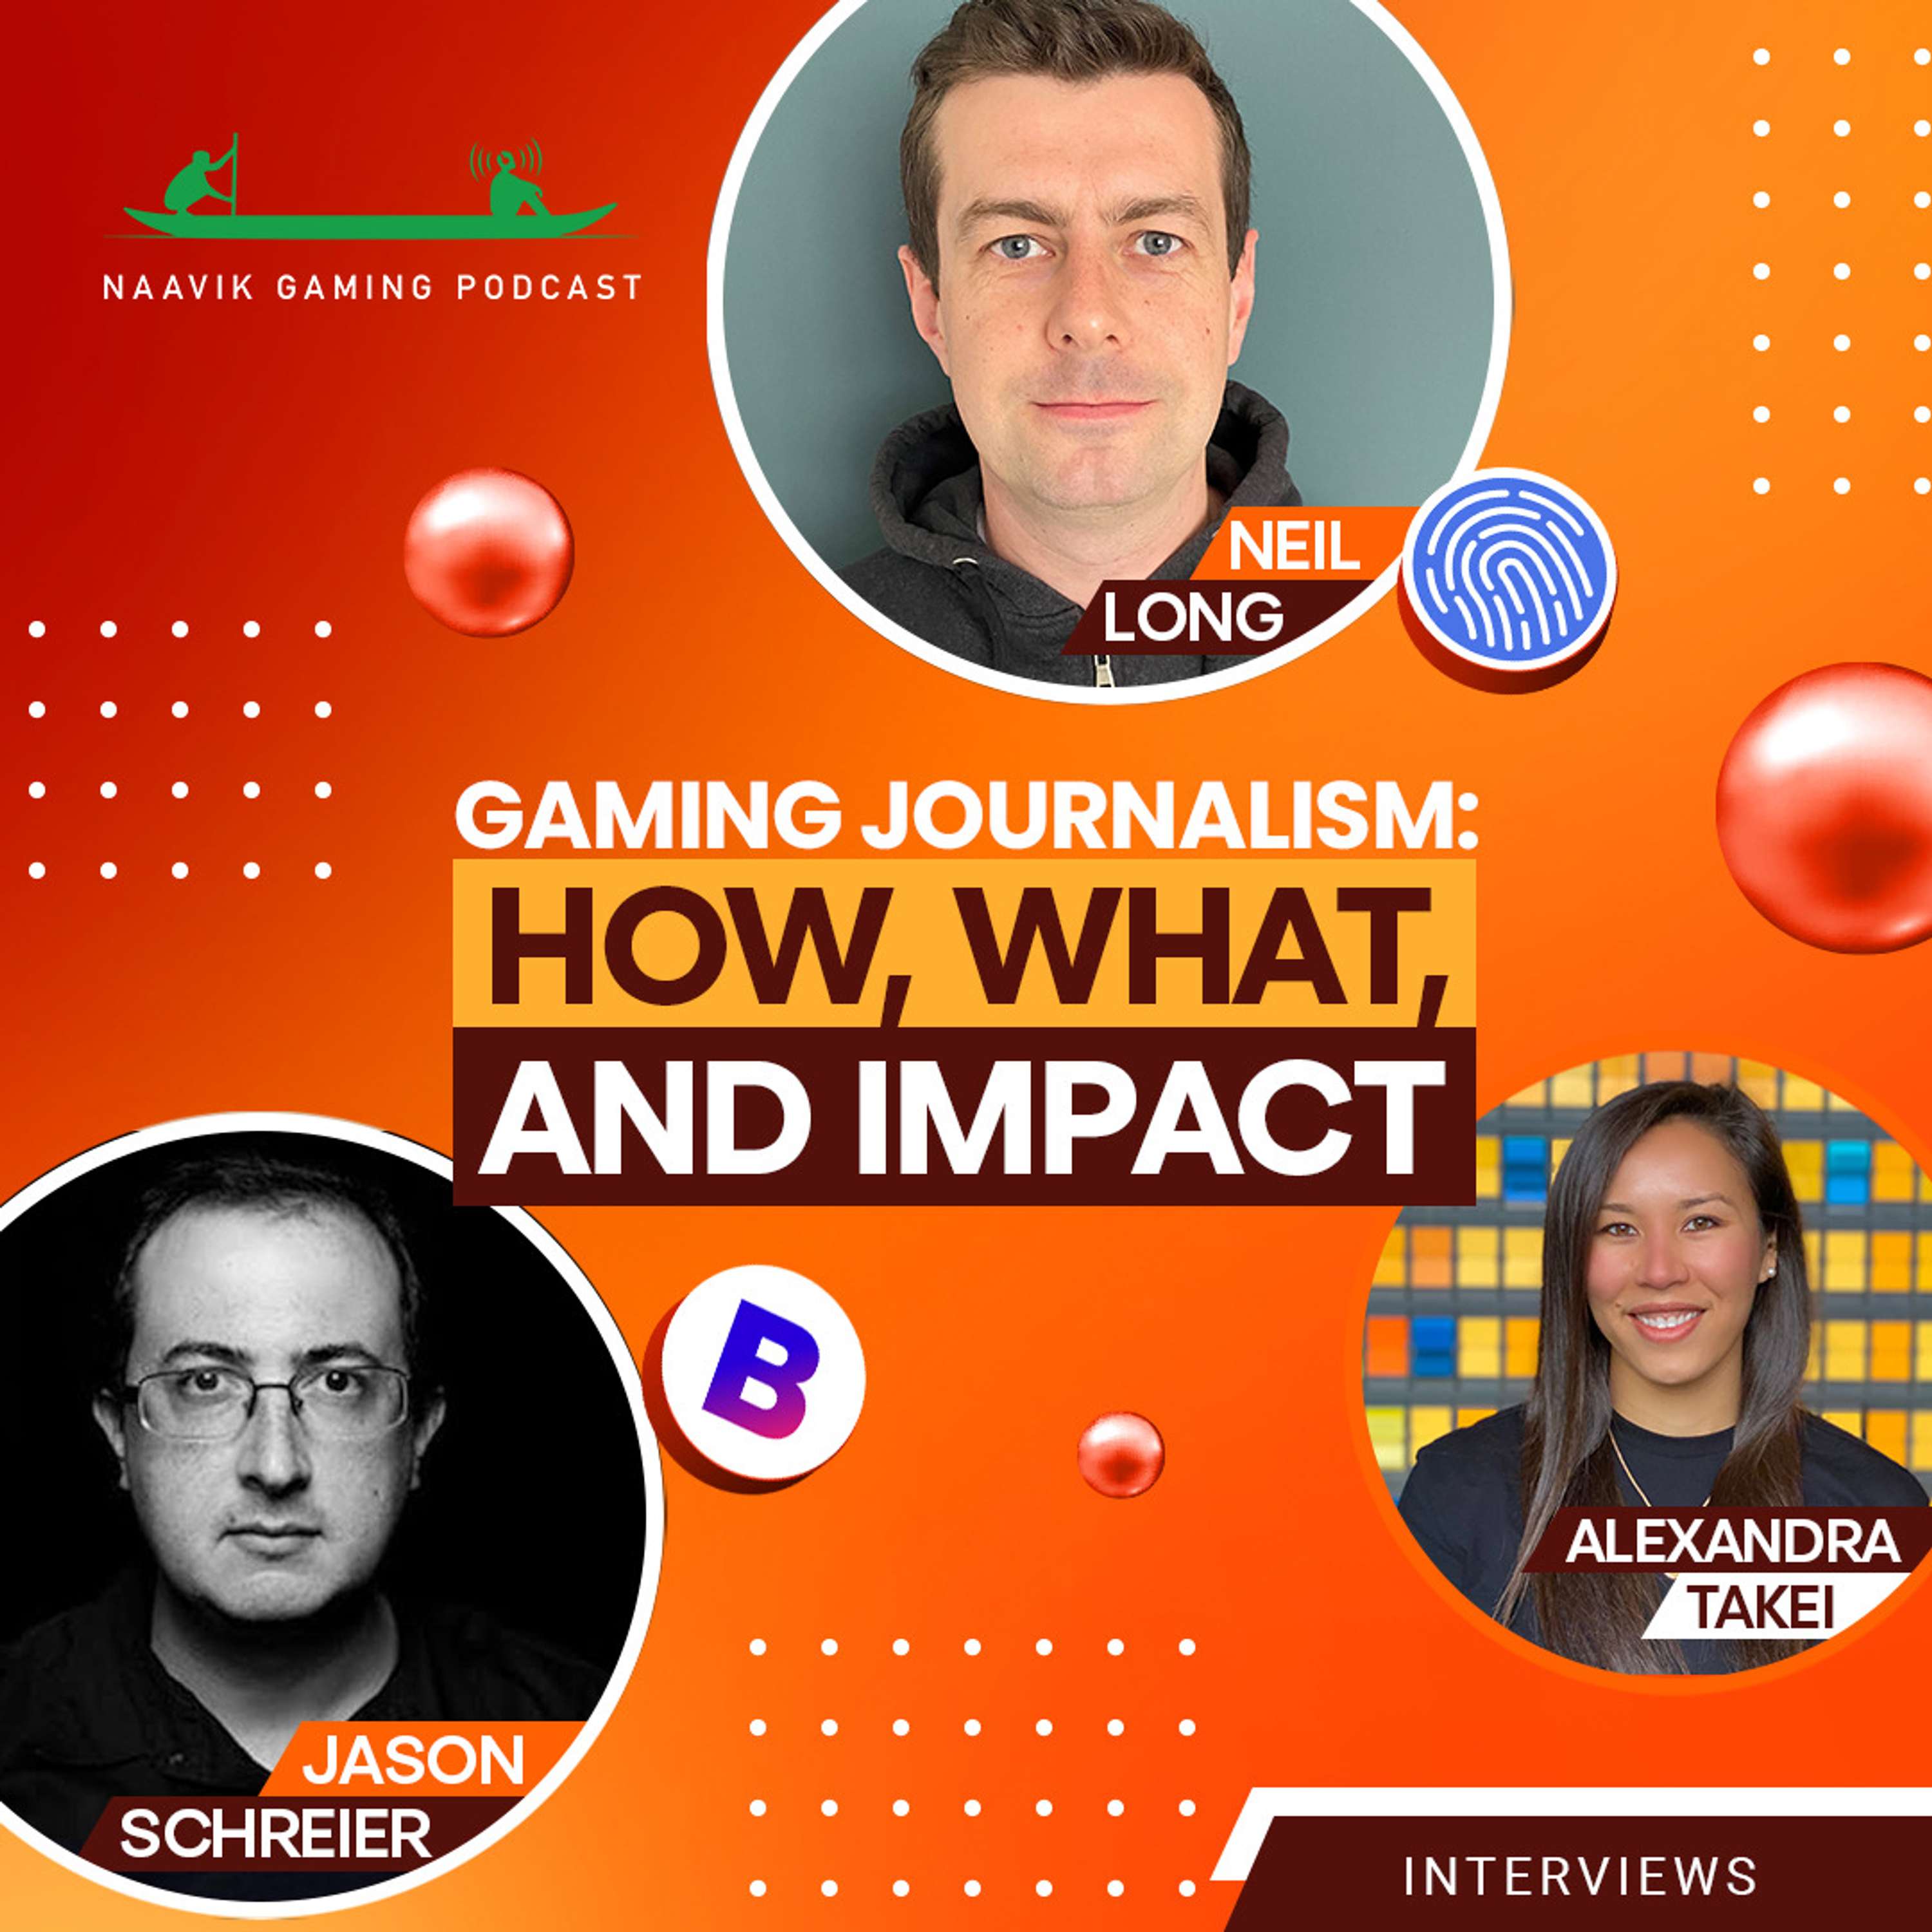 Gaming Journalism: How, What, and Impact with Jason Schreier and Neil Long